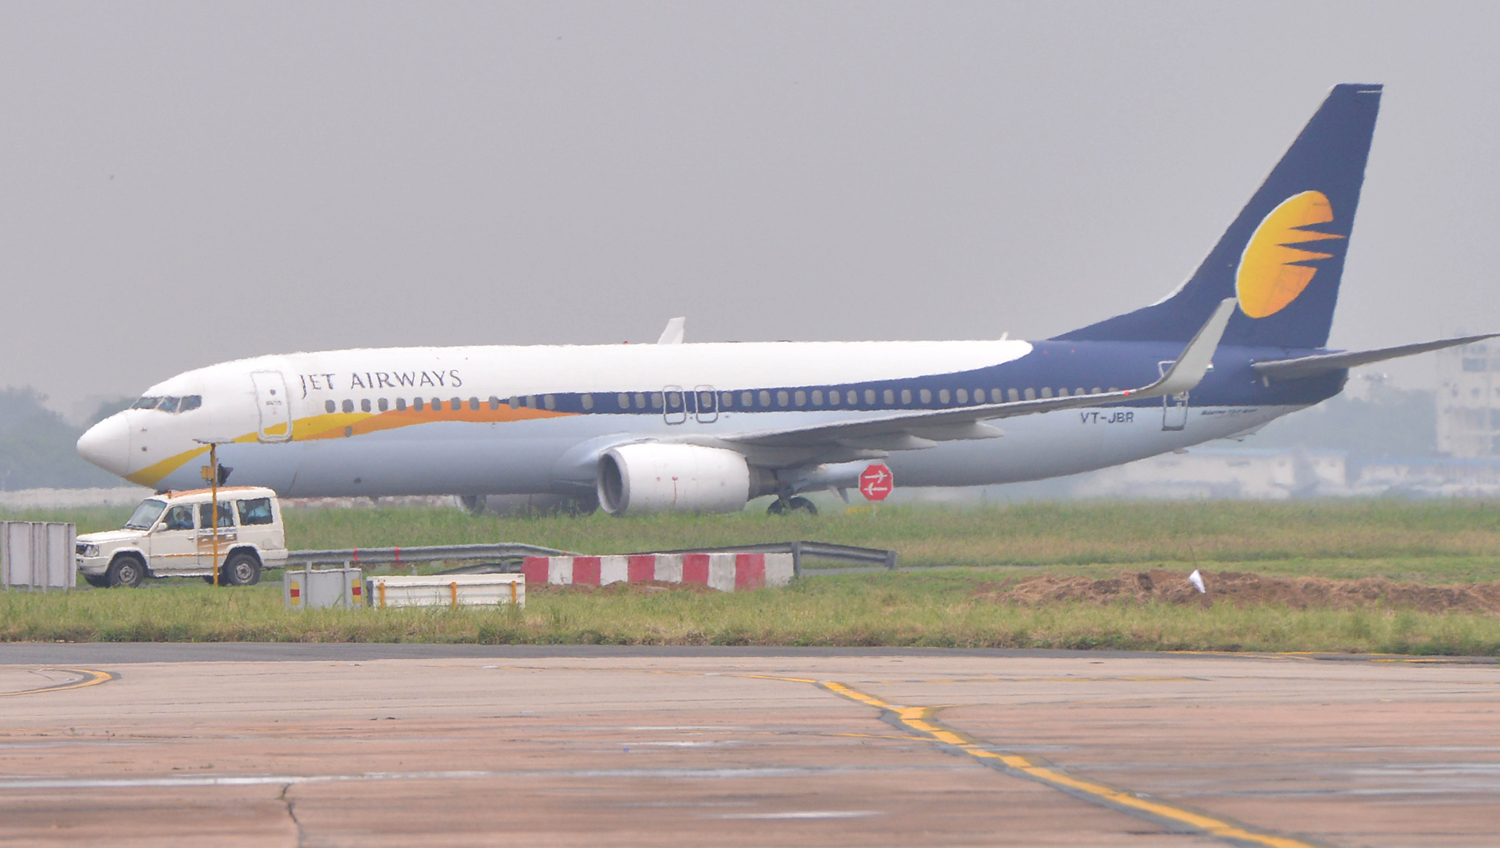 Jet Airways currently offers five options in economy class— Light, Deal, Saver, Classic and Flex